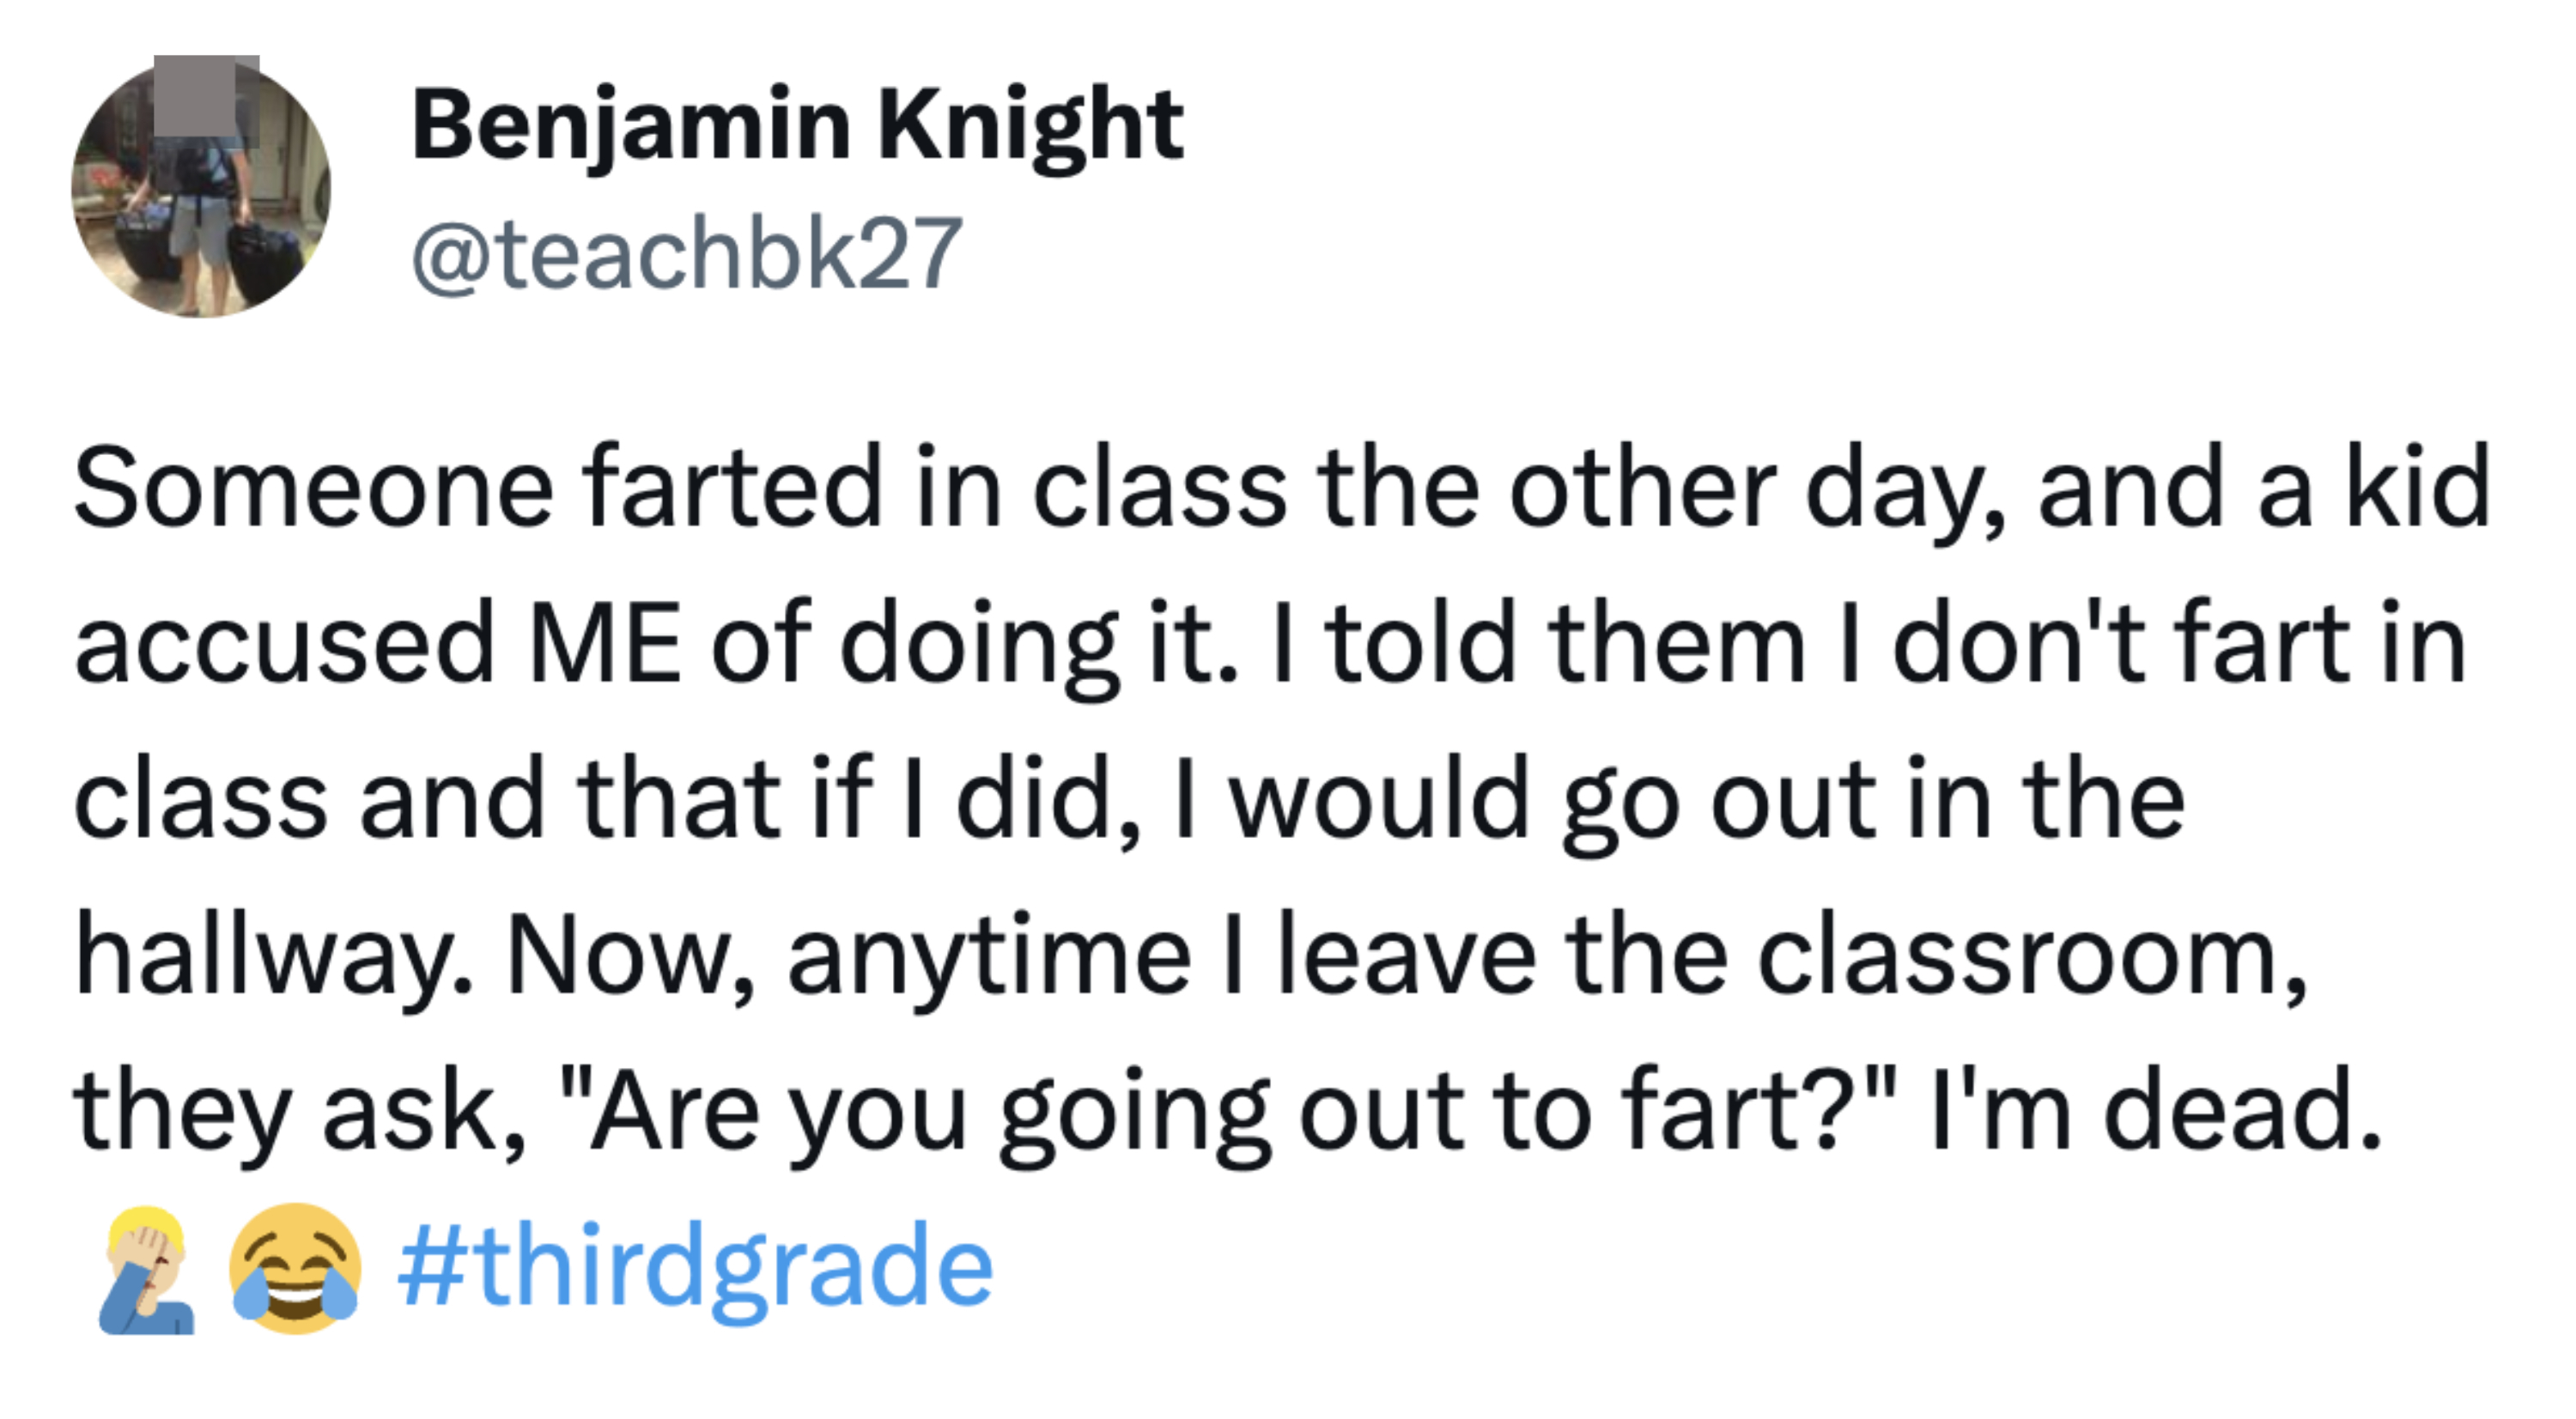 Someone farted in the class and accused another student of doing it; he told them he doesn&#x27;t fart in class, and if he did, he&#x27;d go in the hallway; now whenever he leaves the classroom, they ask &quot;Are you going out to fart?&quot;